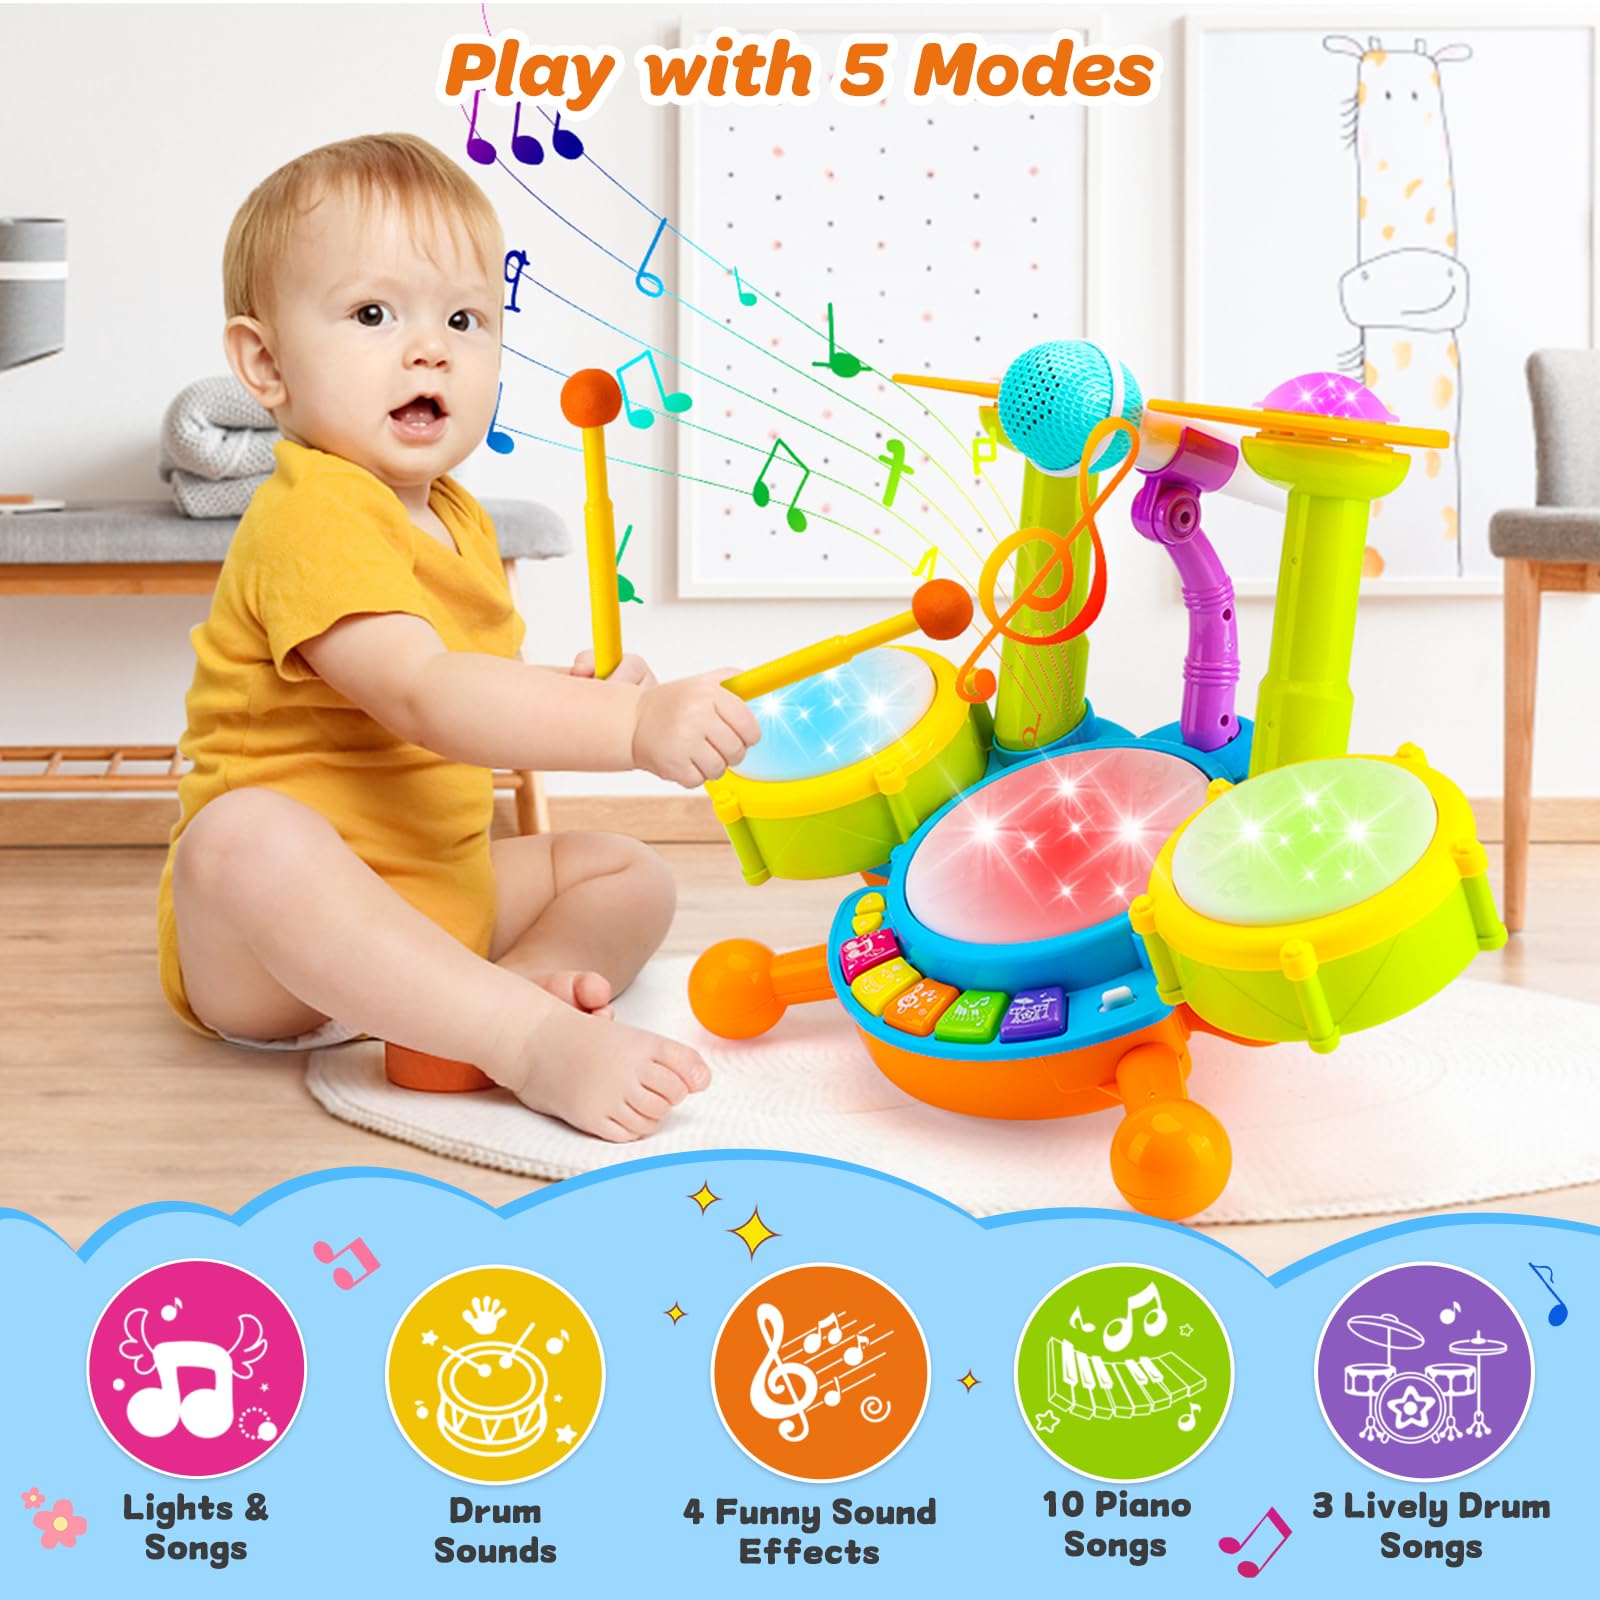 Kids Drum Set for Toddlers 1-3 Musical Baby Toys for 1 Year Old Boy Gifts Montessori Baby Girl Toys with Microphone Light Up Learning Toys Birthday Gifts for Infants 6 9 12 18 Months Toddler Age 1-2